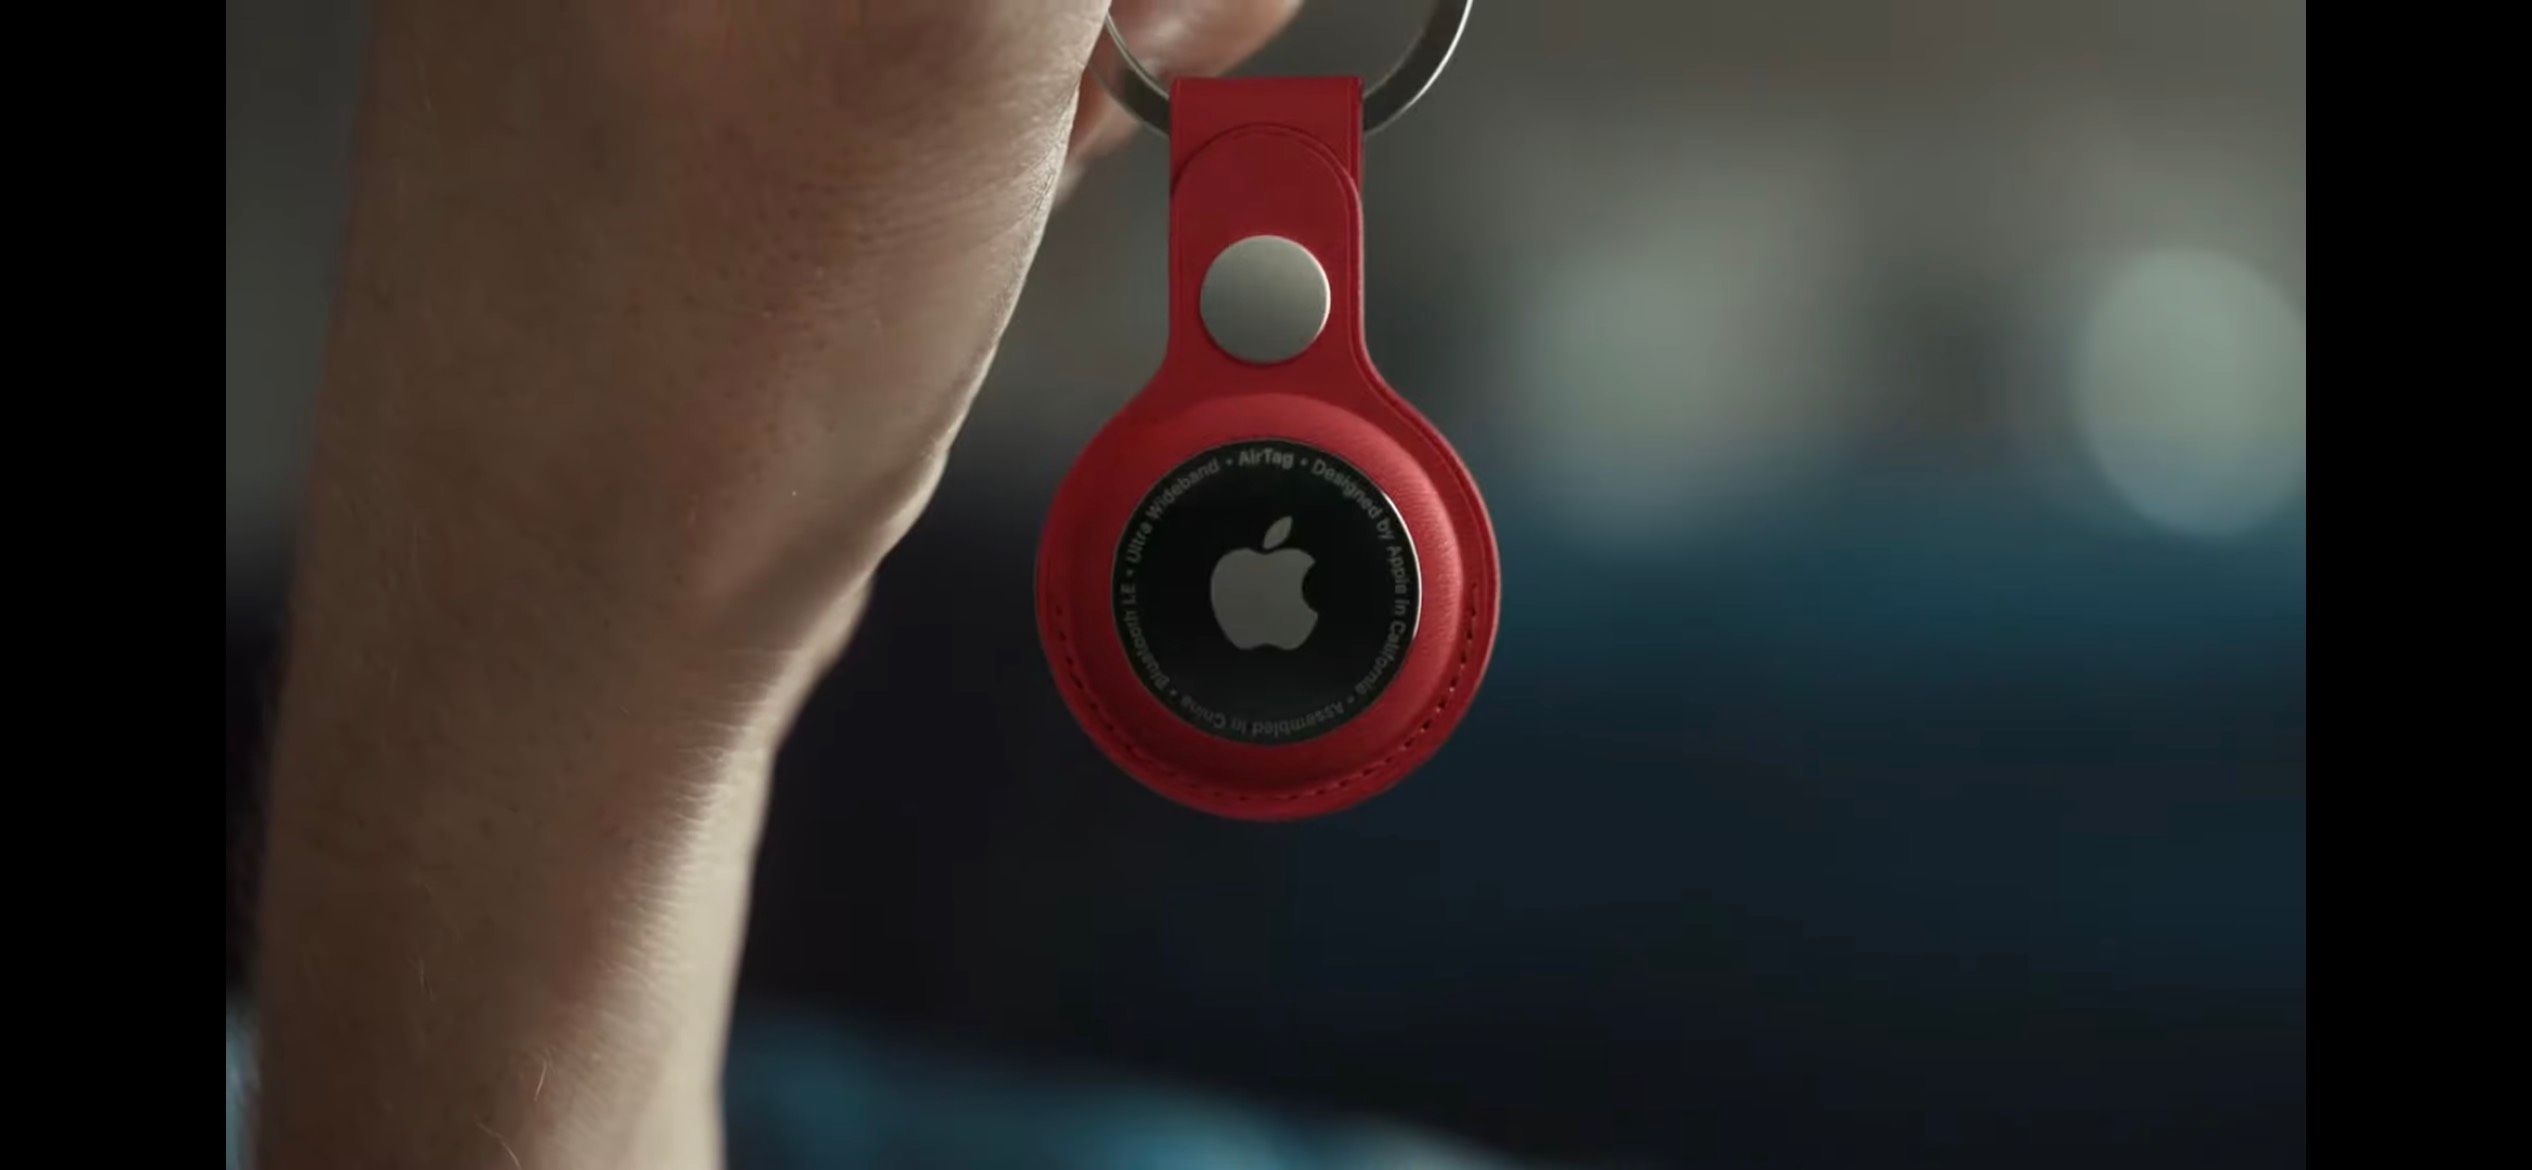 Apple Airtag on Red Keychain in Hand